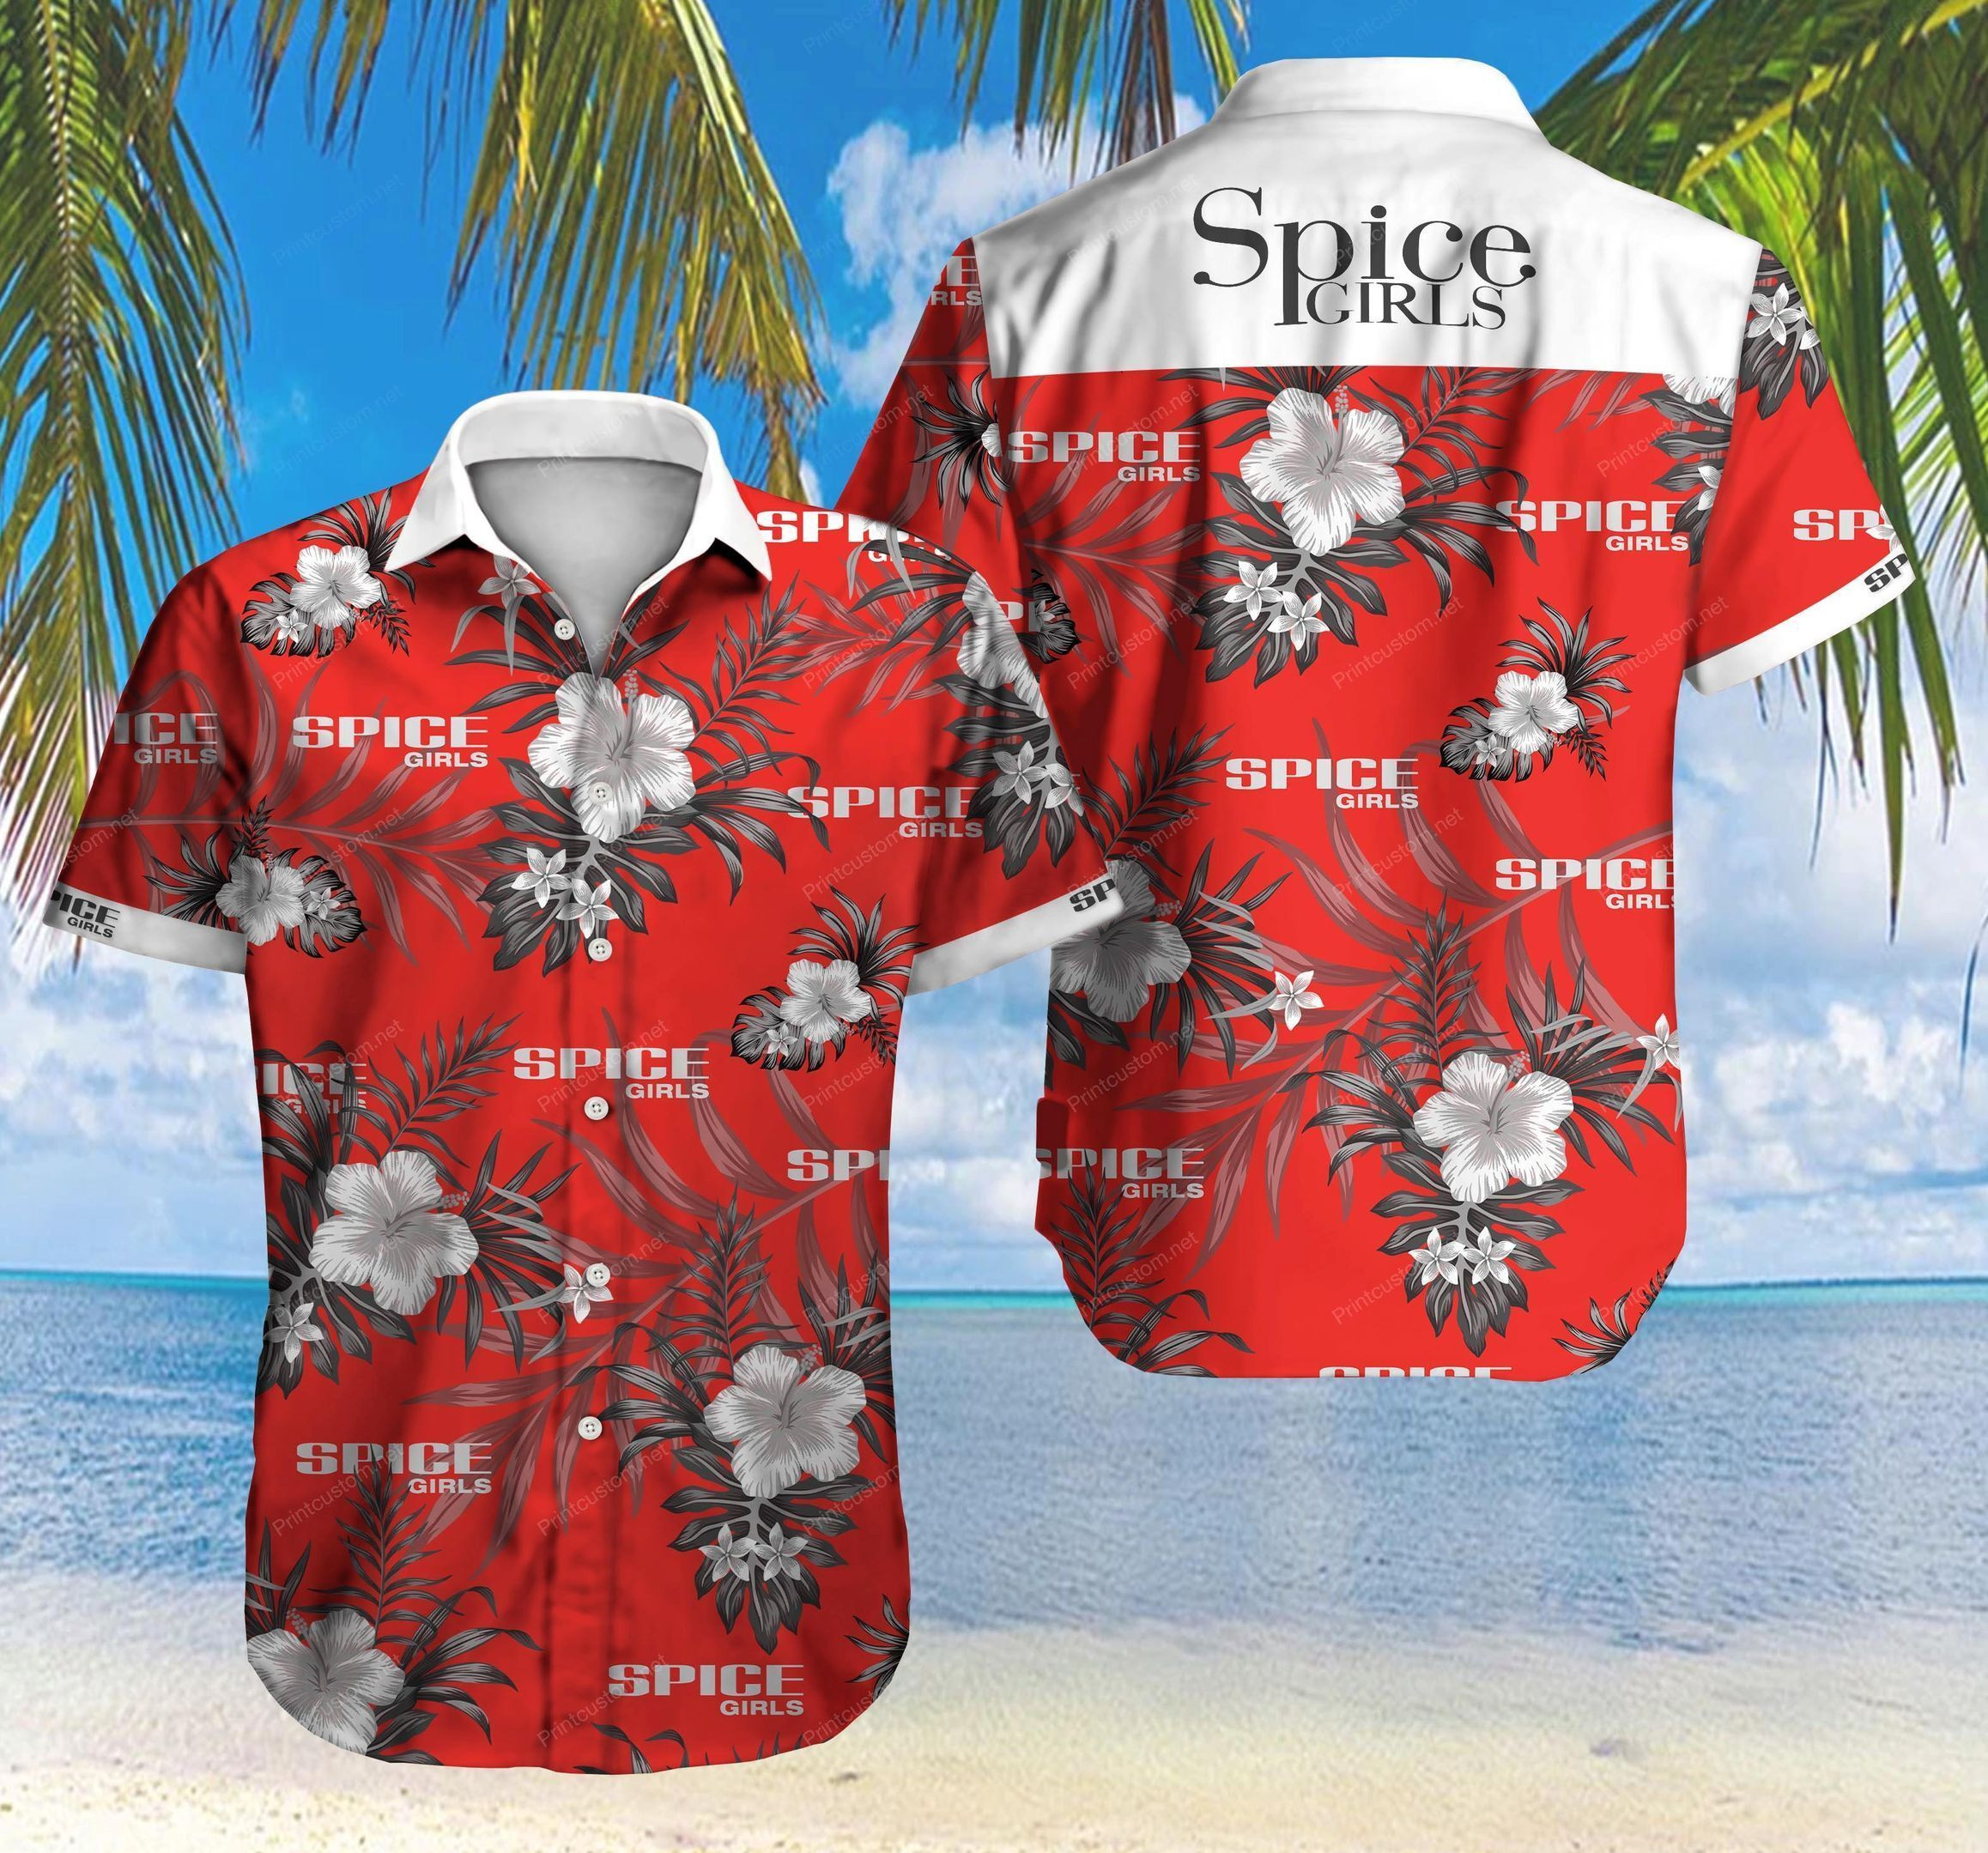 Choose from the many styles and colors to find your favorite Hawaiian Shirt below 228